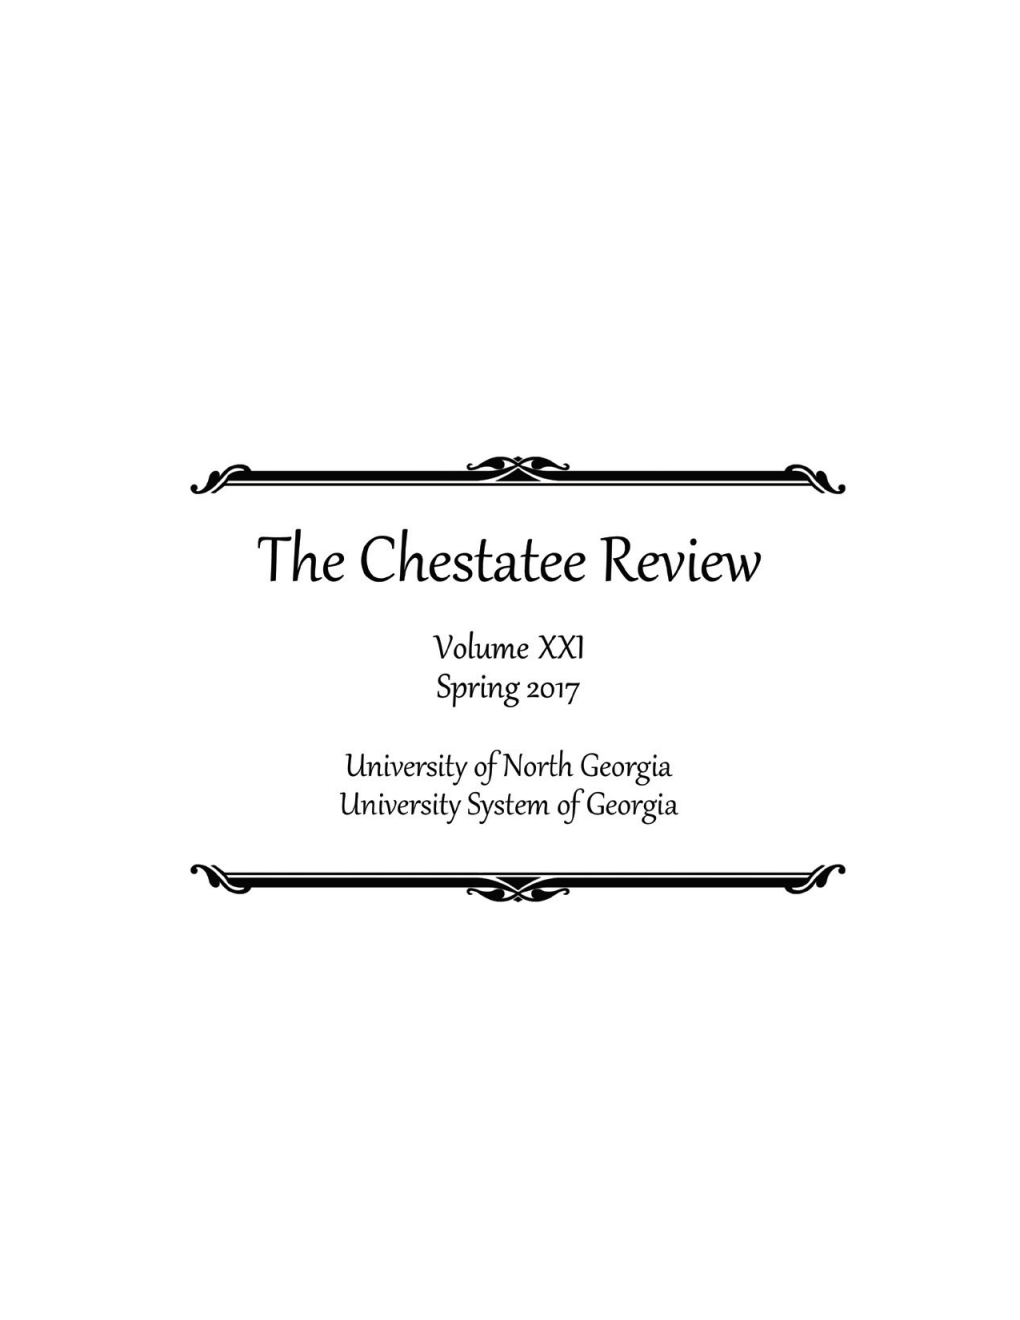 Chestatee Review 2017